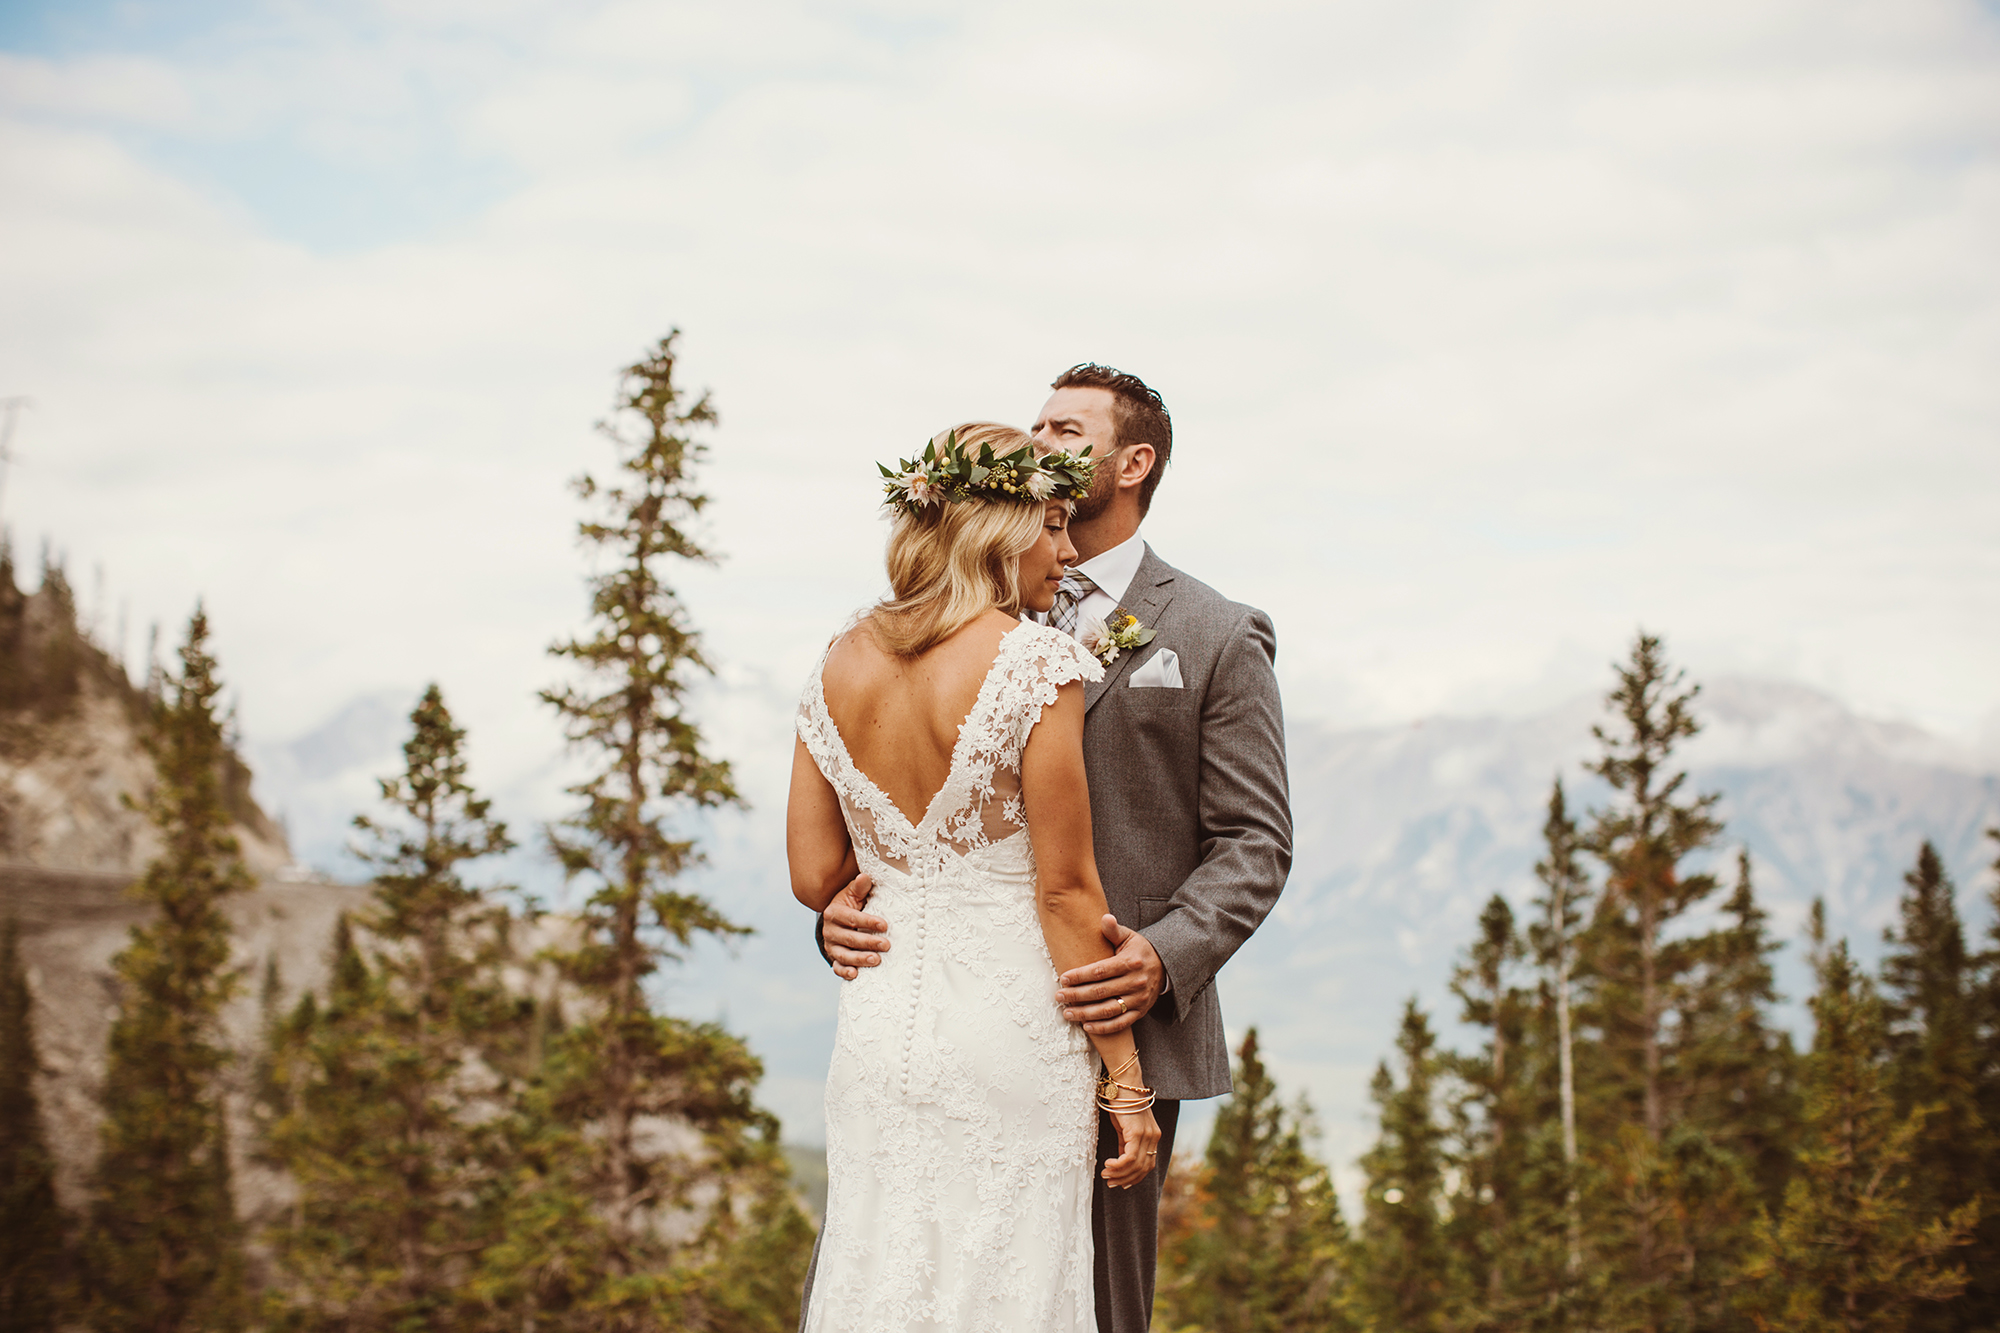 Brittany + Andrew - Canmore, Alberta